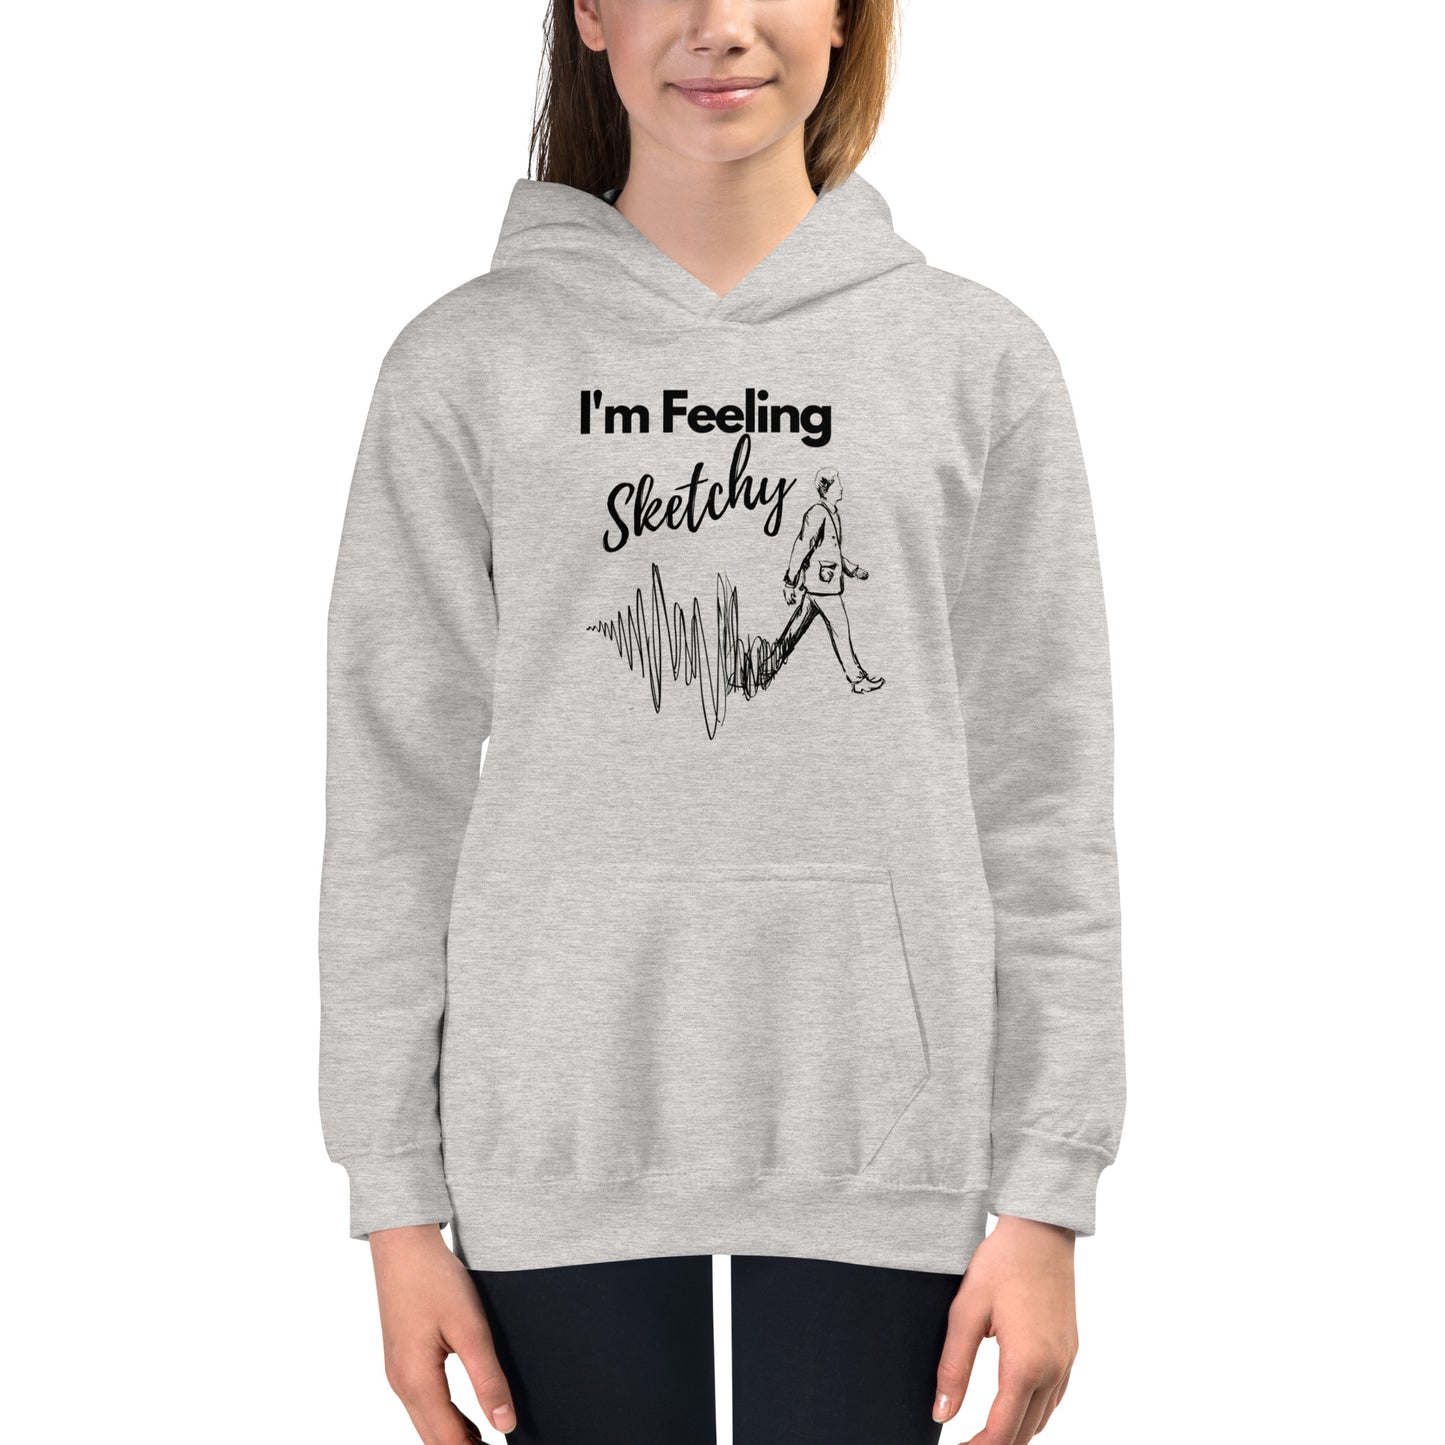 unisex hoodie for kids - Art lover gifts